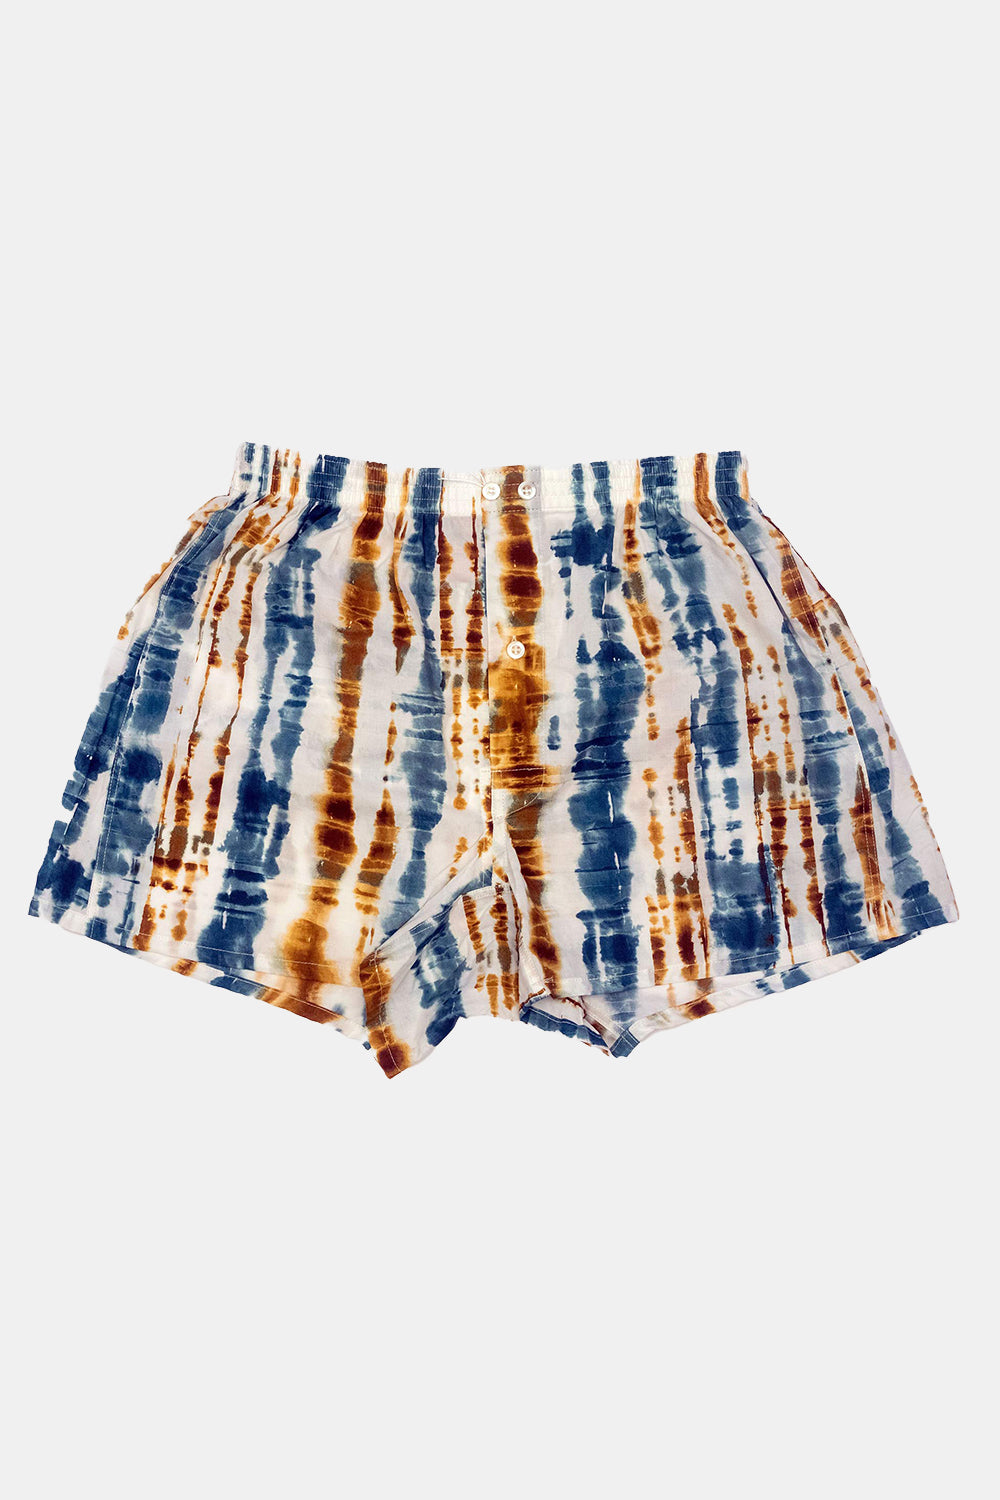 Anonymous Ism Tie Dye Boxers (Blue/Brown)